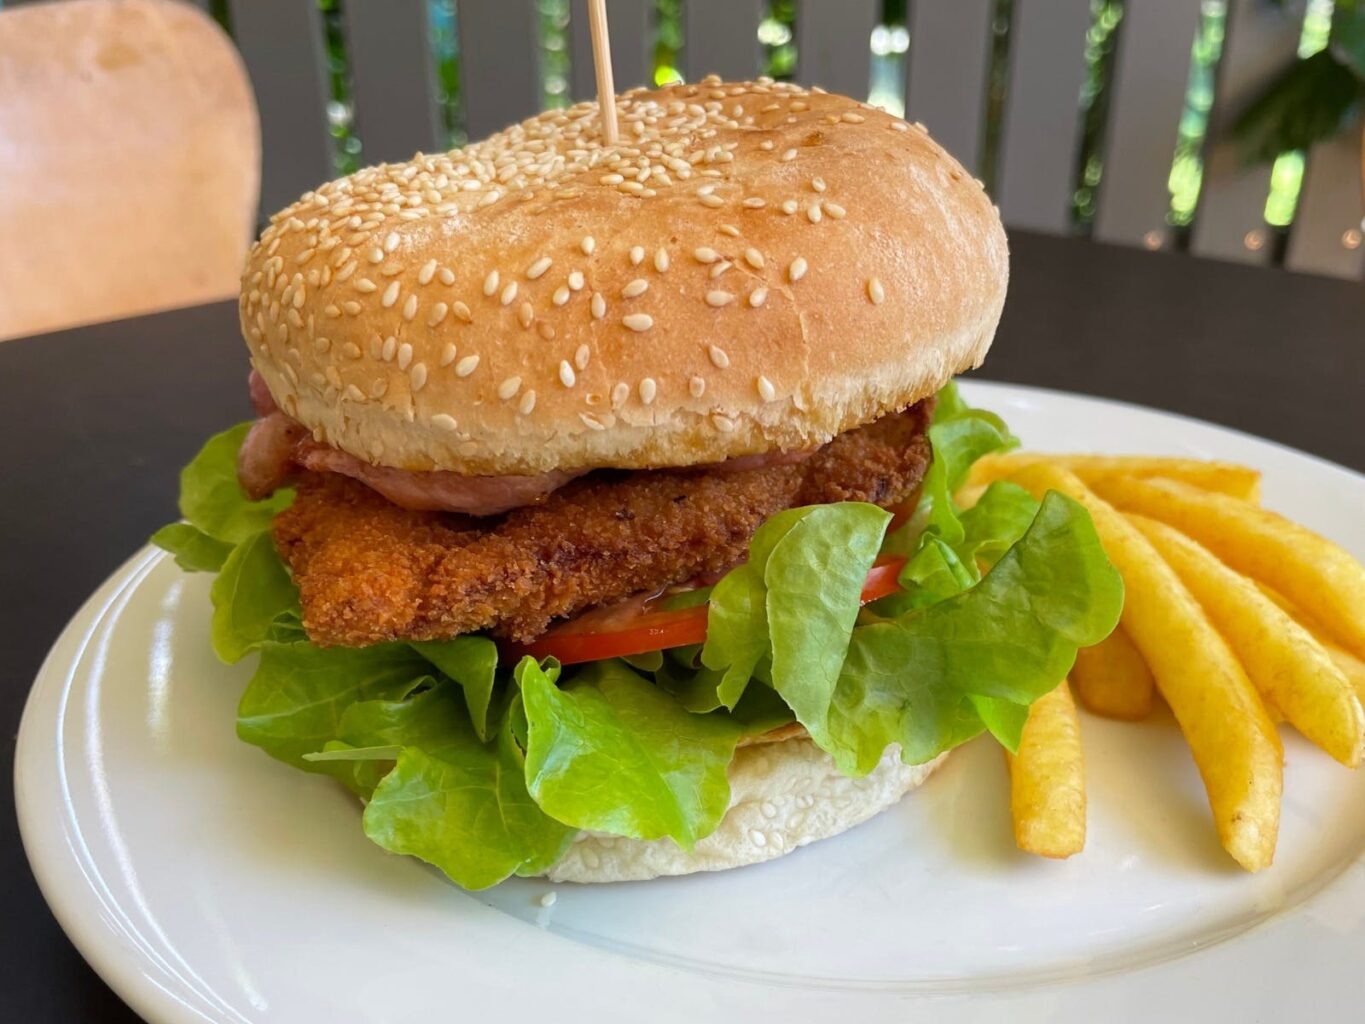 Chicken & bacon burger on a sesame seed bun served on a plate with salad and chips